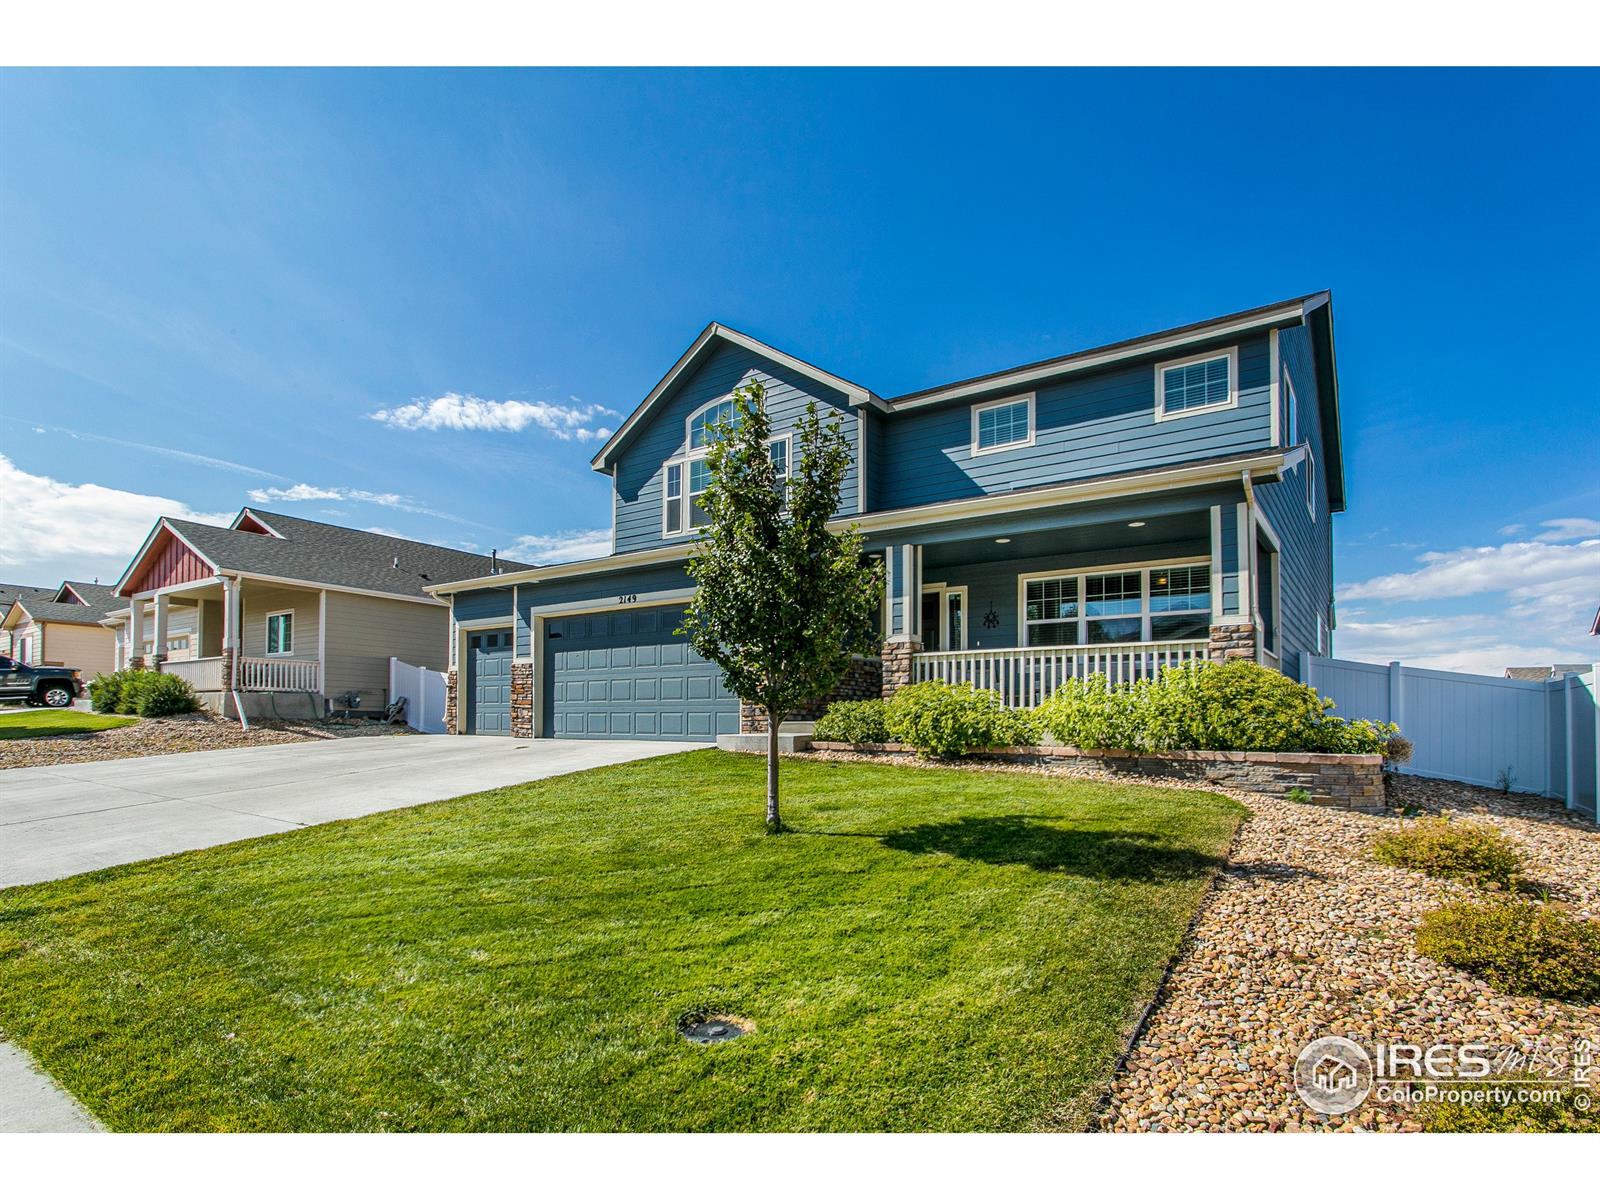 2149 74th, Greeley, CO